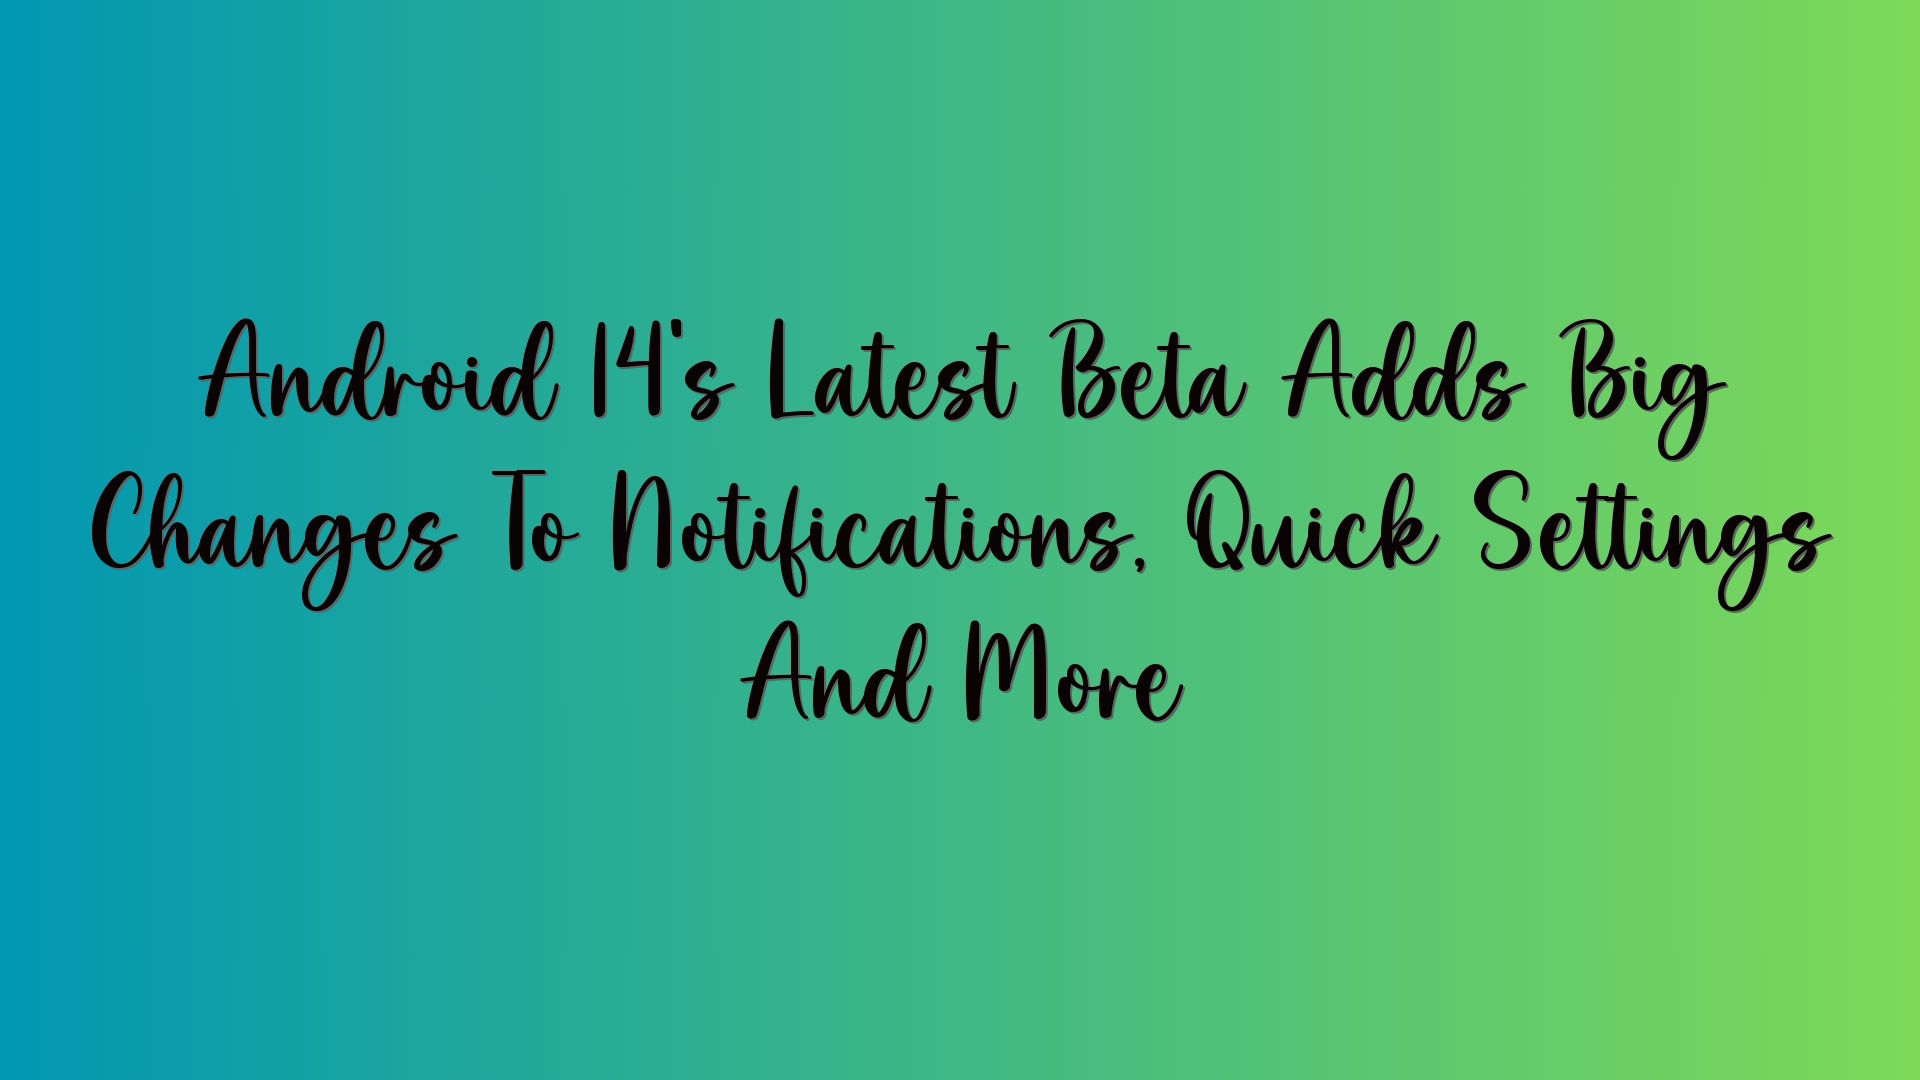 Android 14’s Latest Beta Adds Big Changes To Notifications, Quick Settings And More